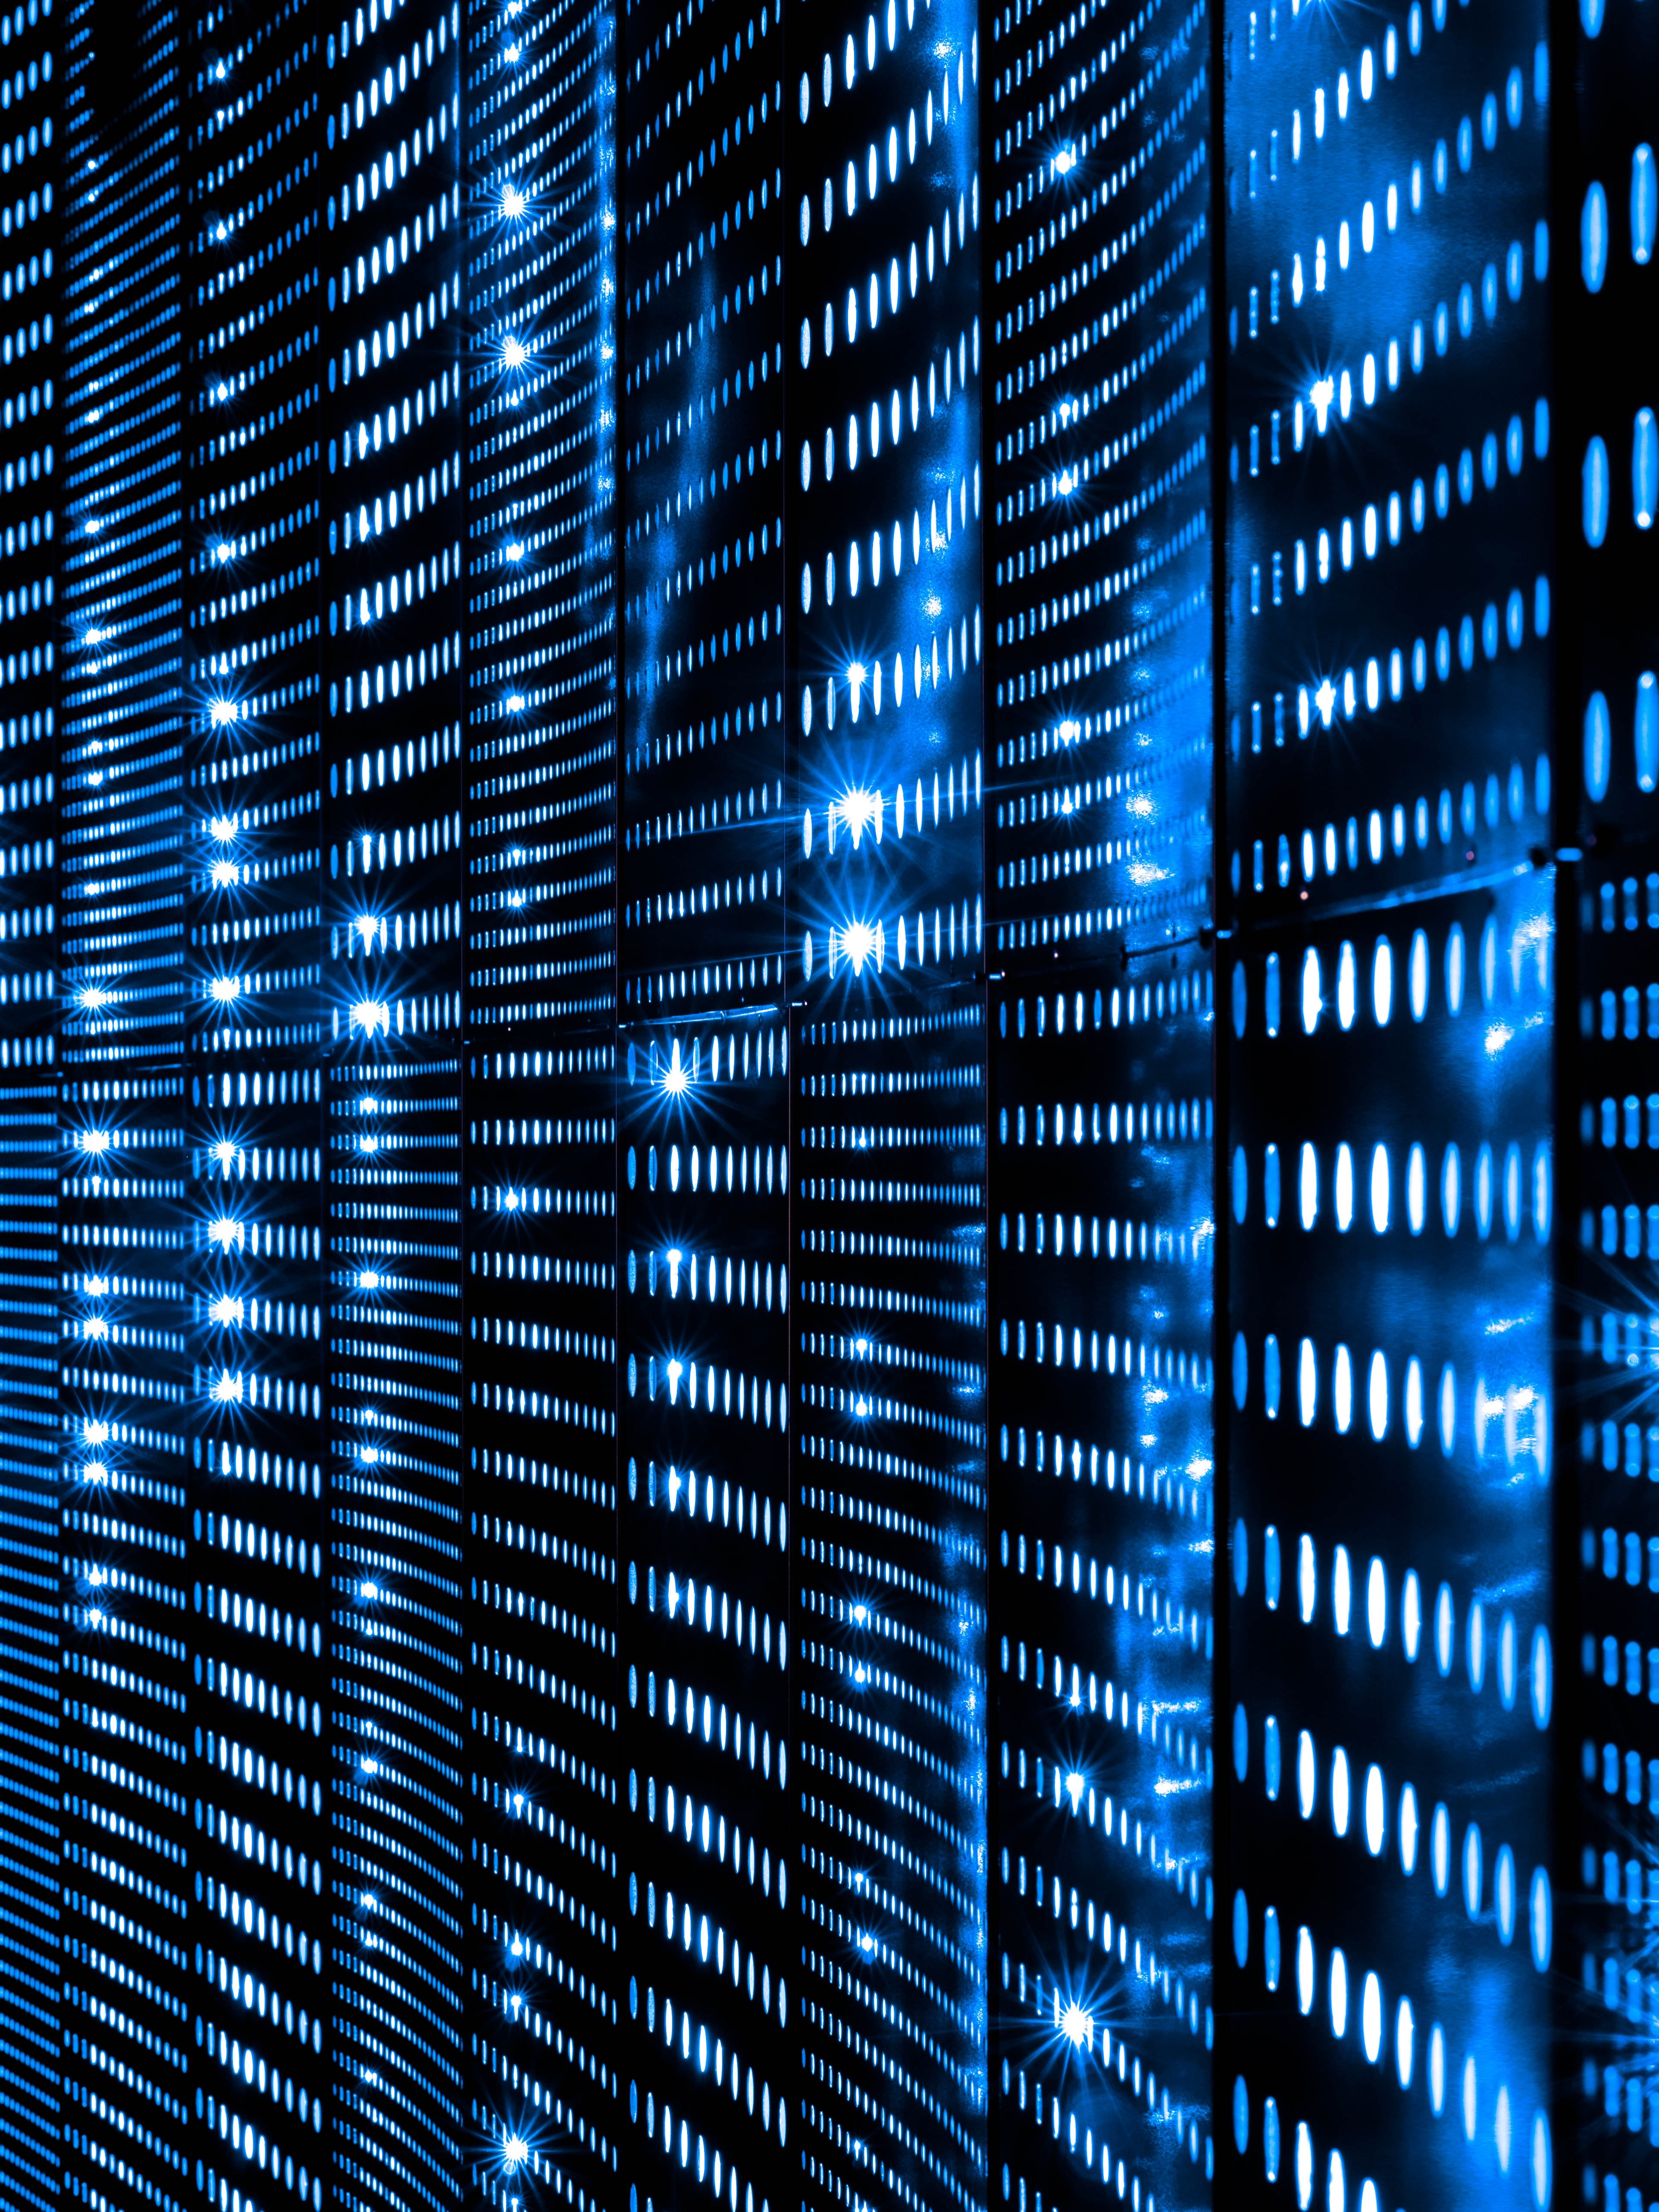 A row of blue lights from a computer server creates a decorative vertical pattern 